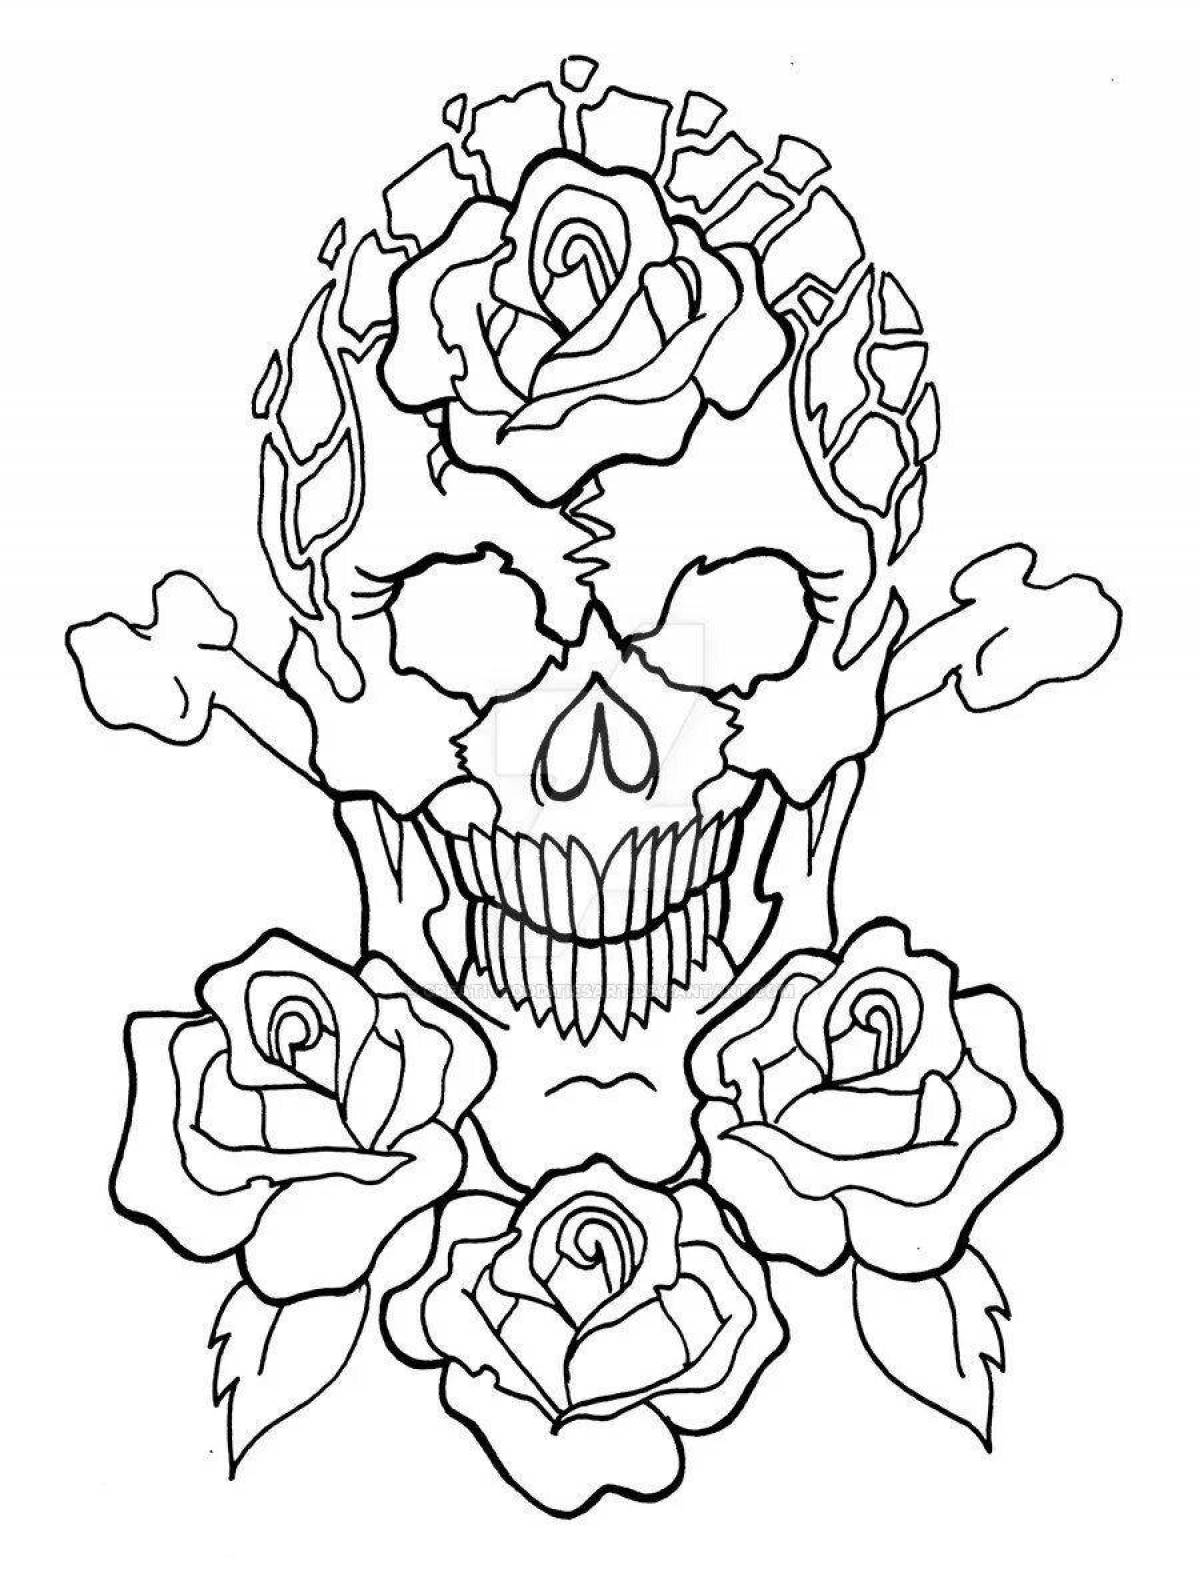 Playful old school coloring page